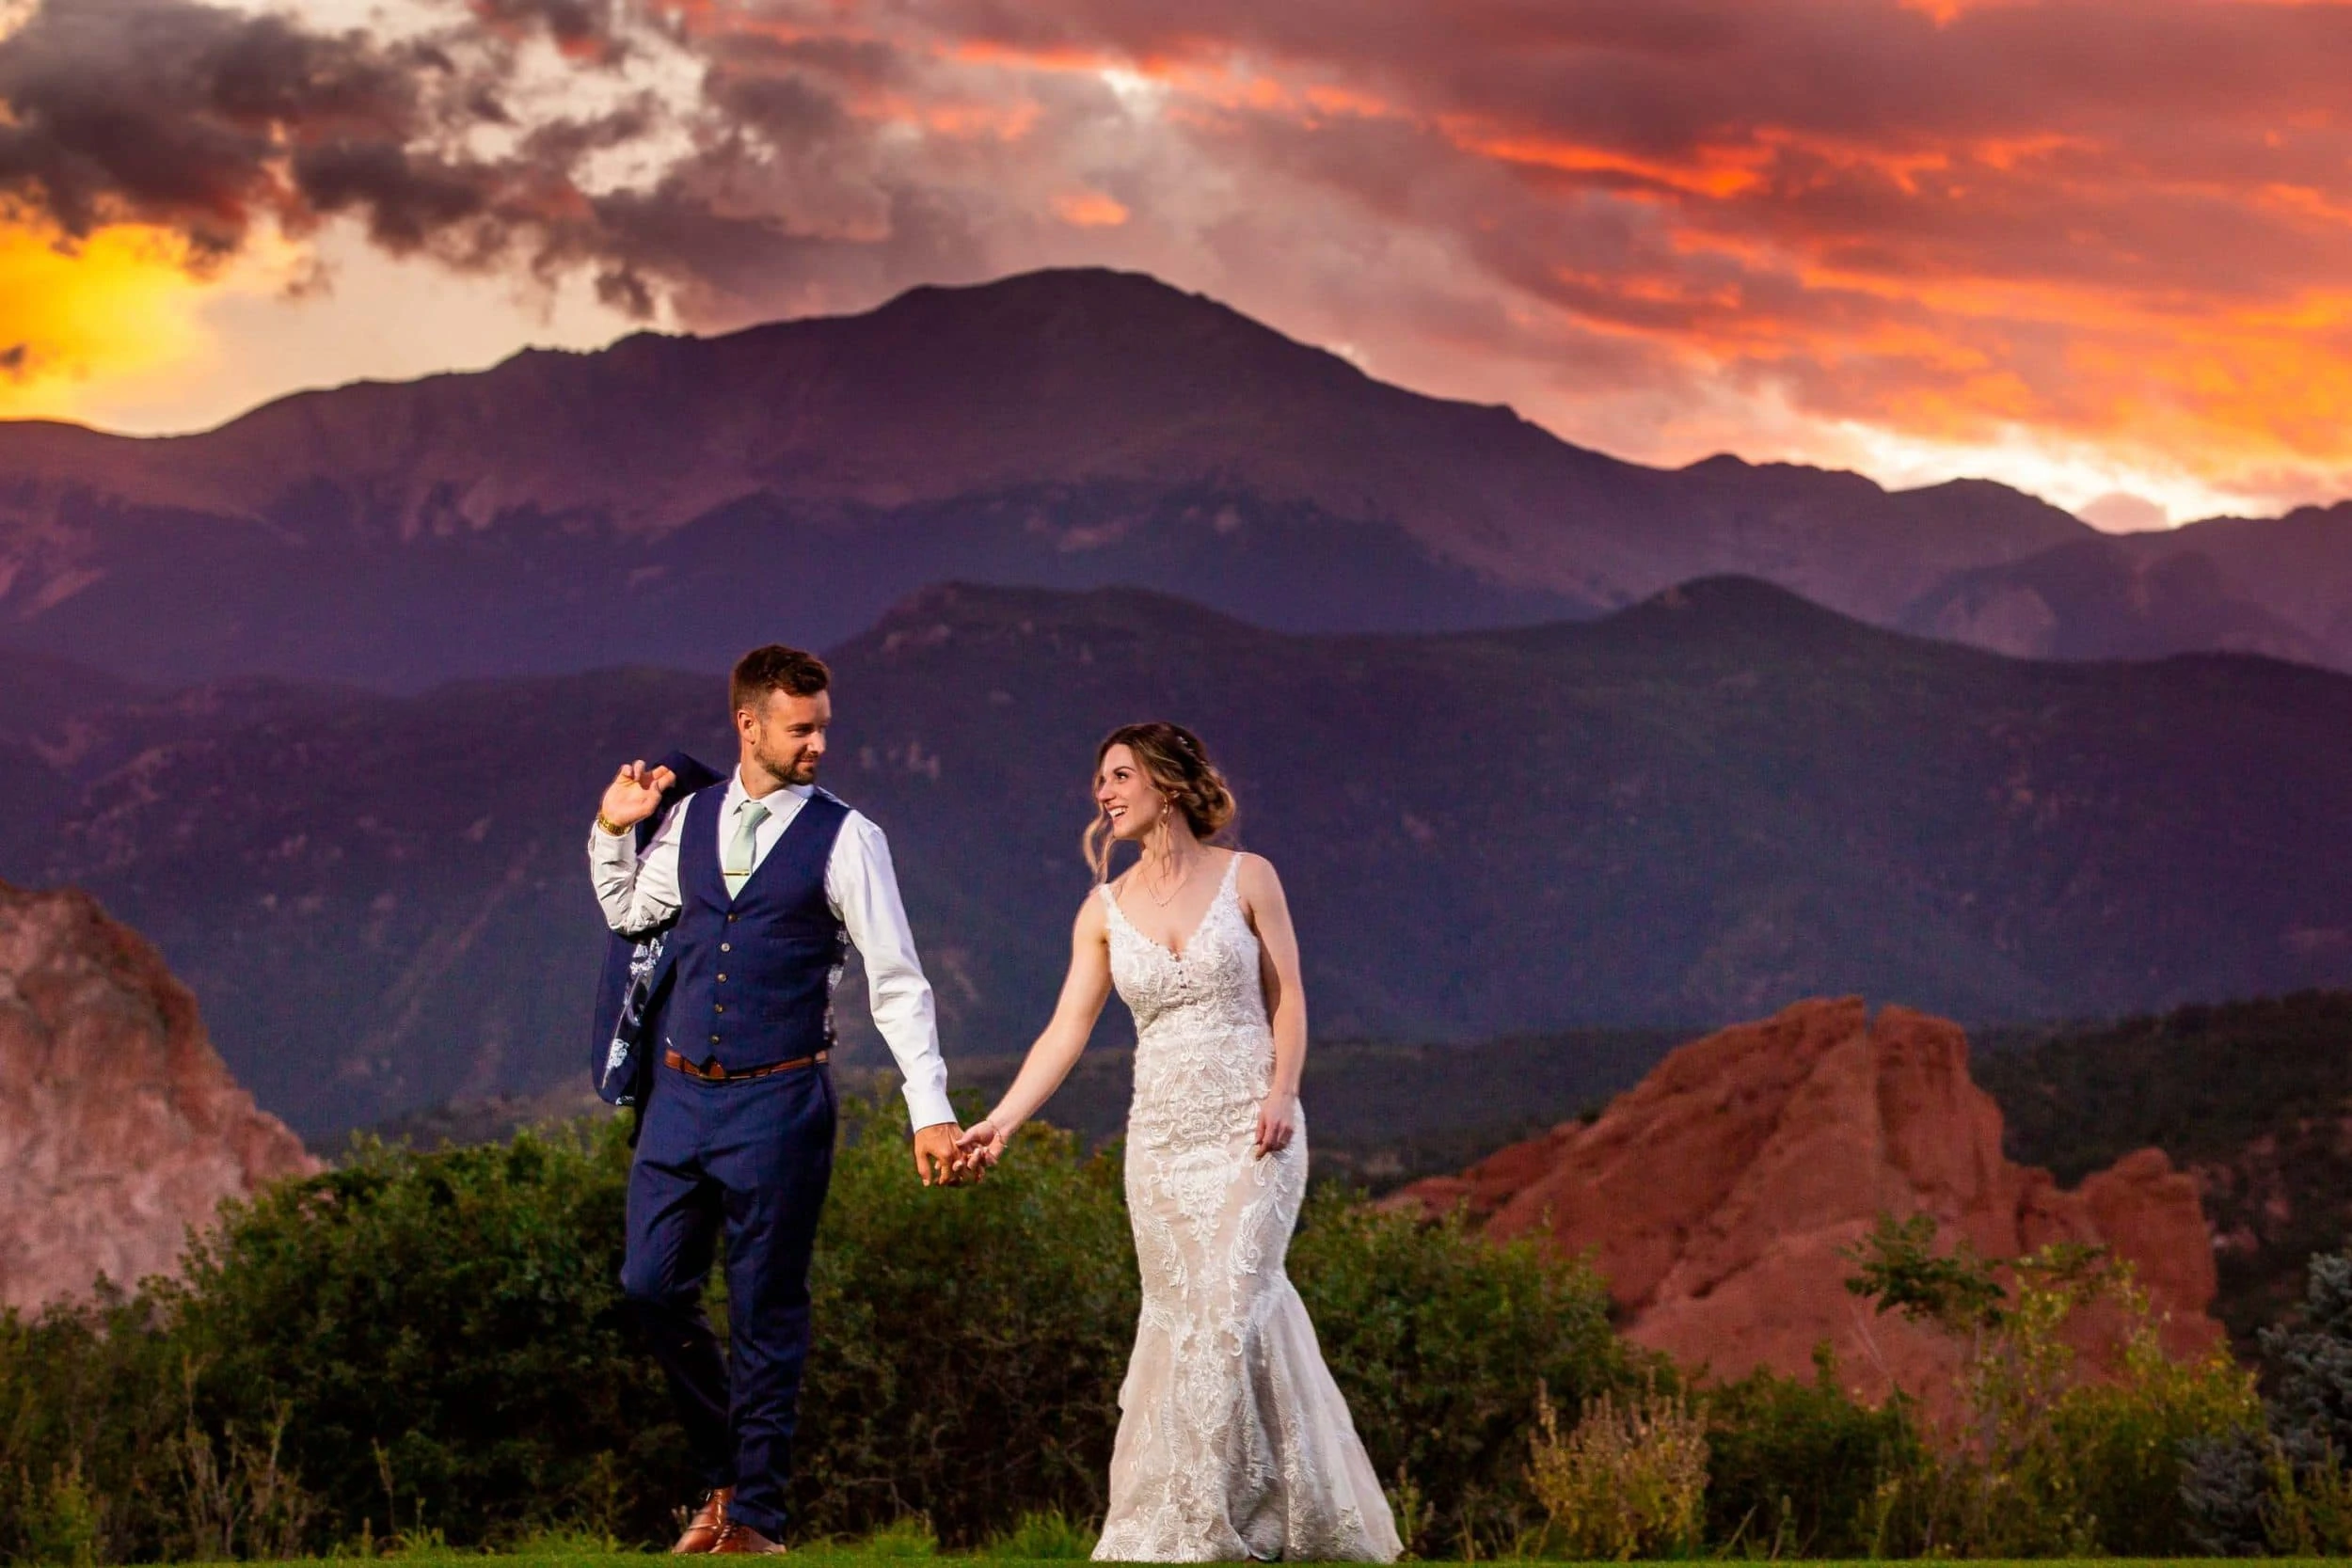 A bride and groom walk hand in hand at sunset with Garden of the Gods in the background.